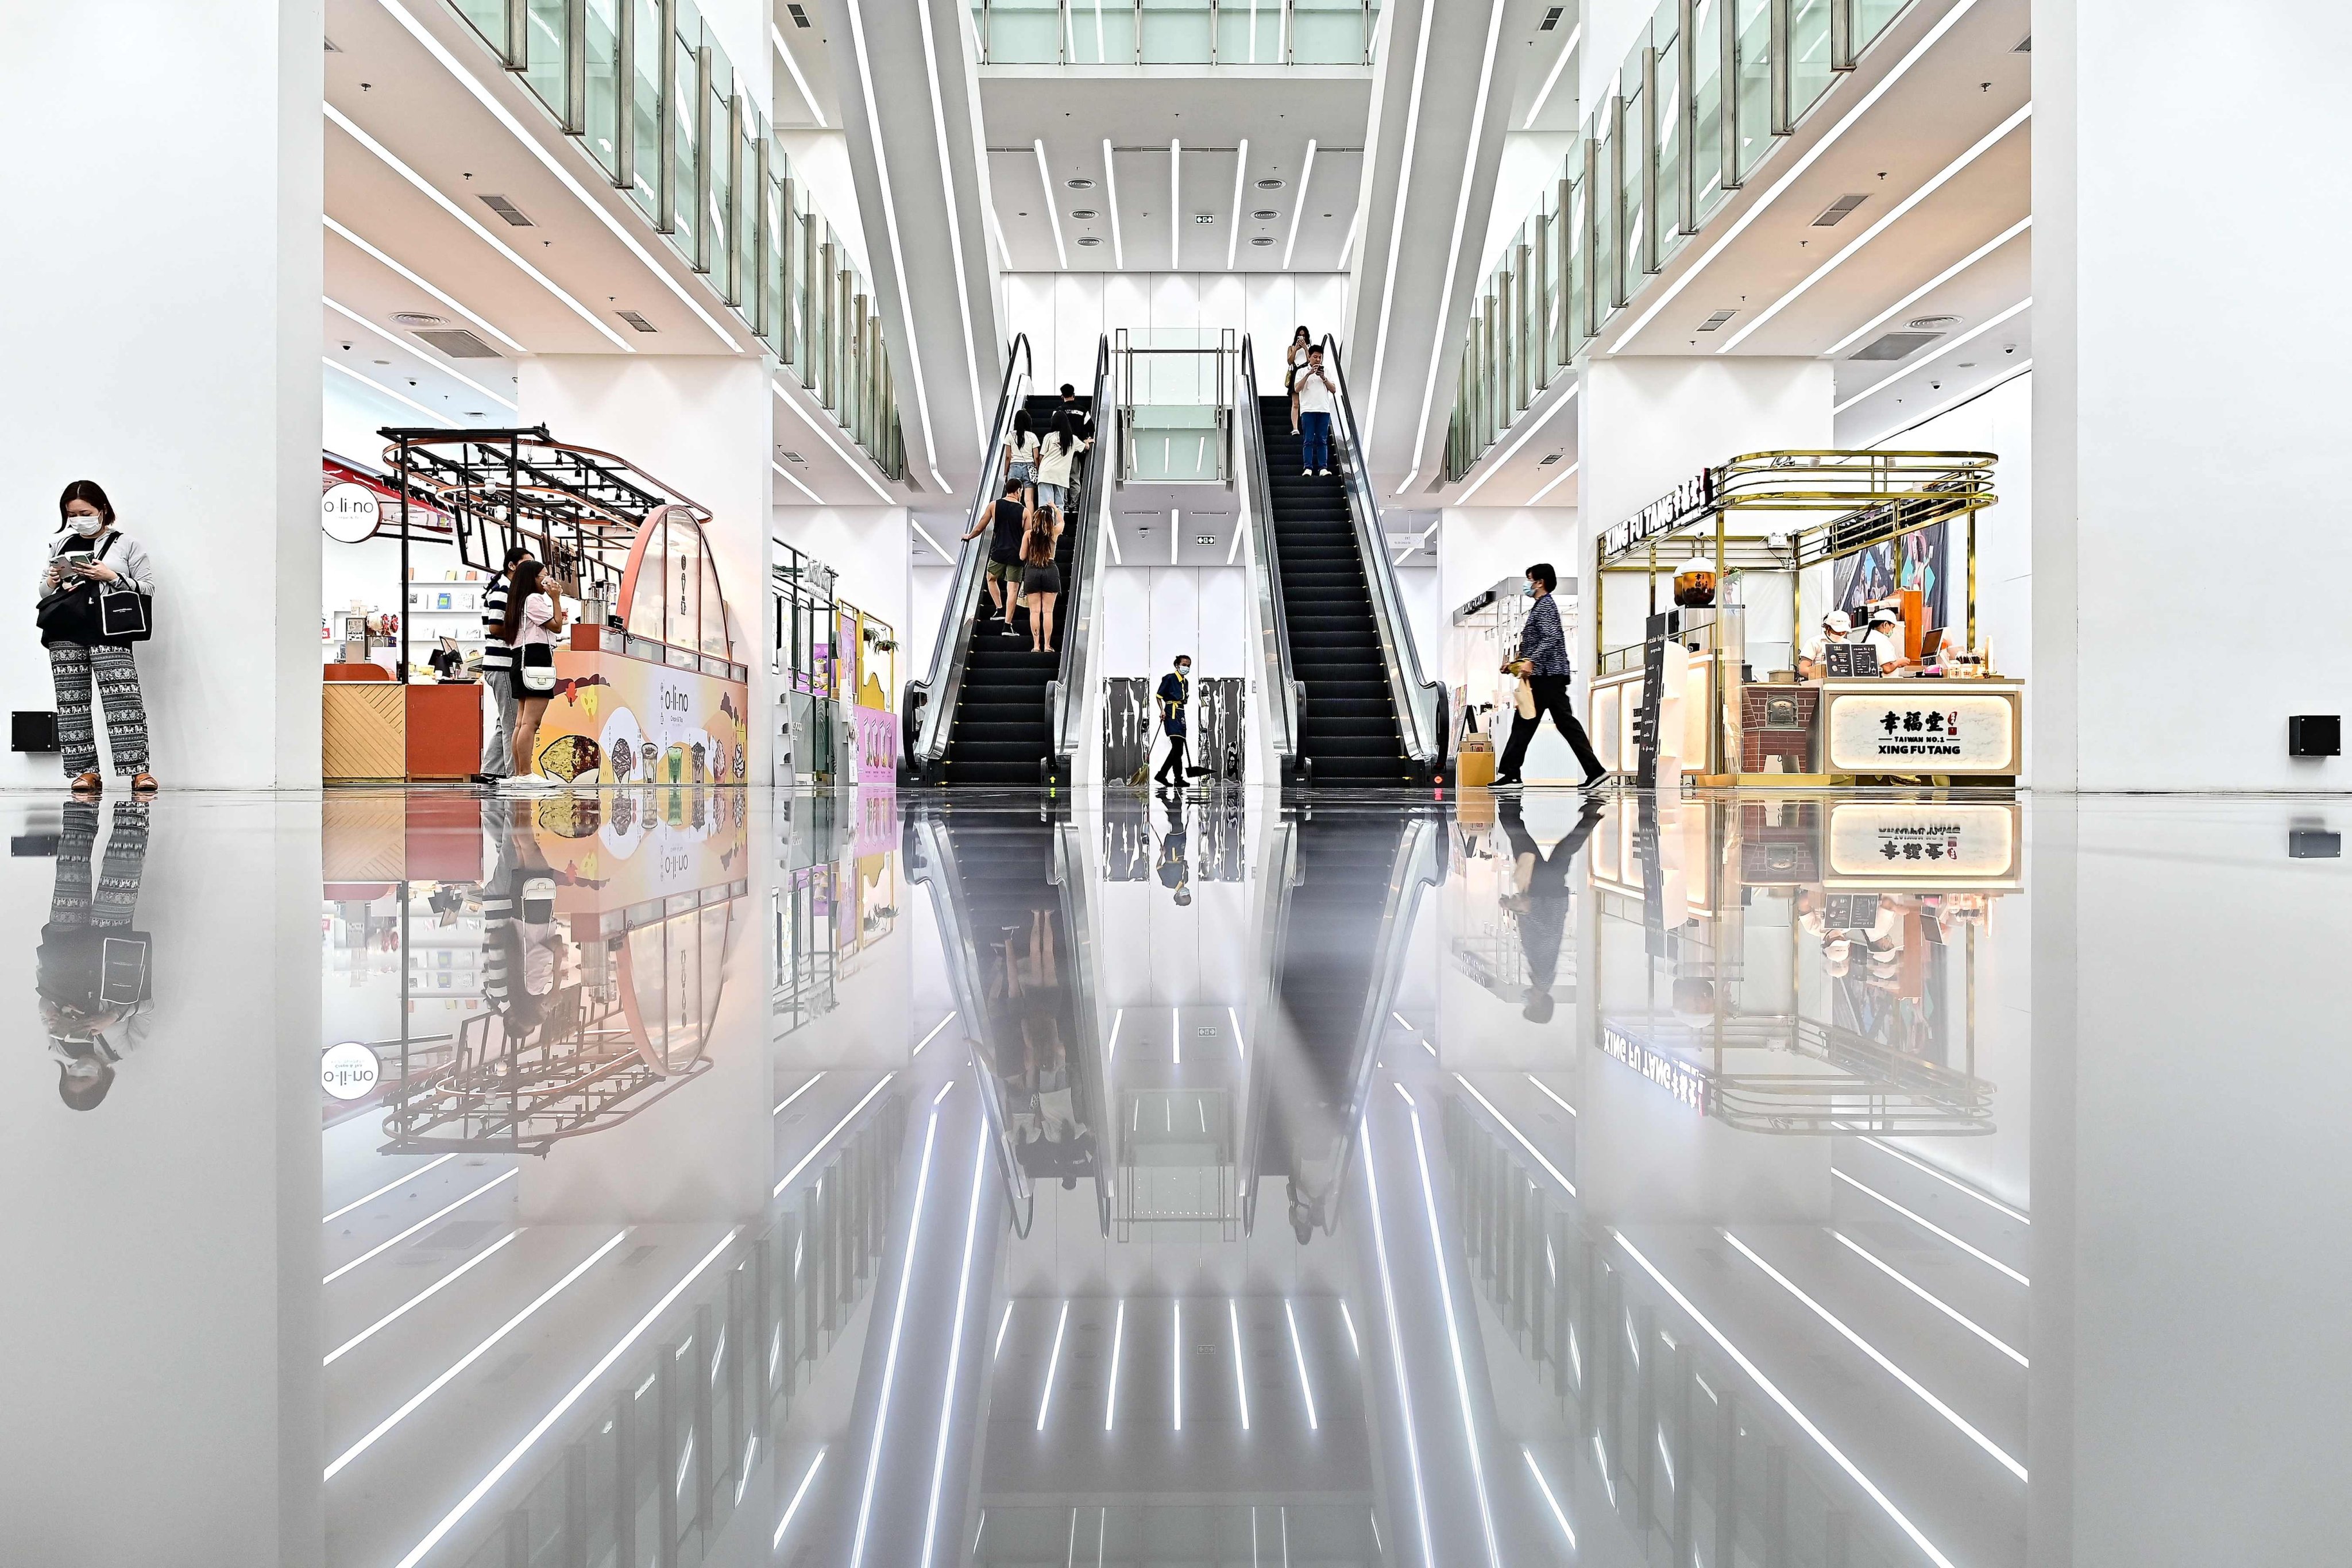 People walk inside a near-empty shopping centre in Bangkok last month. Thailand could face prolonged challenges from weak growth and stagnating demand in Northeast Asia. Photo: AFP